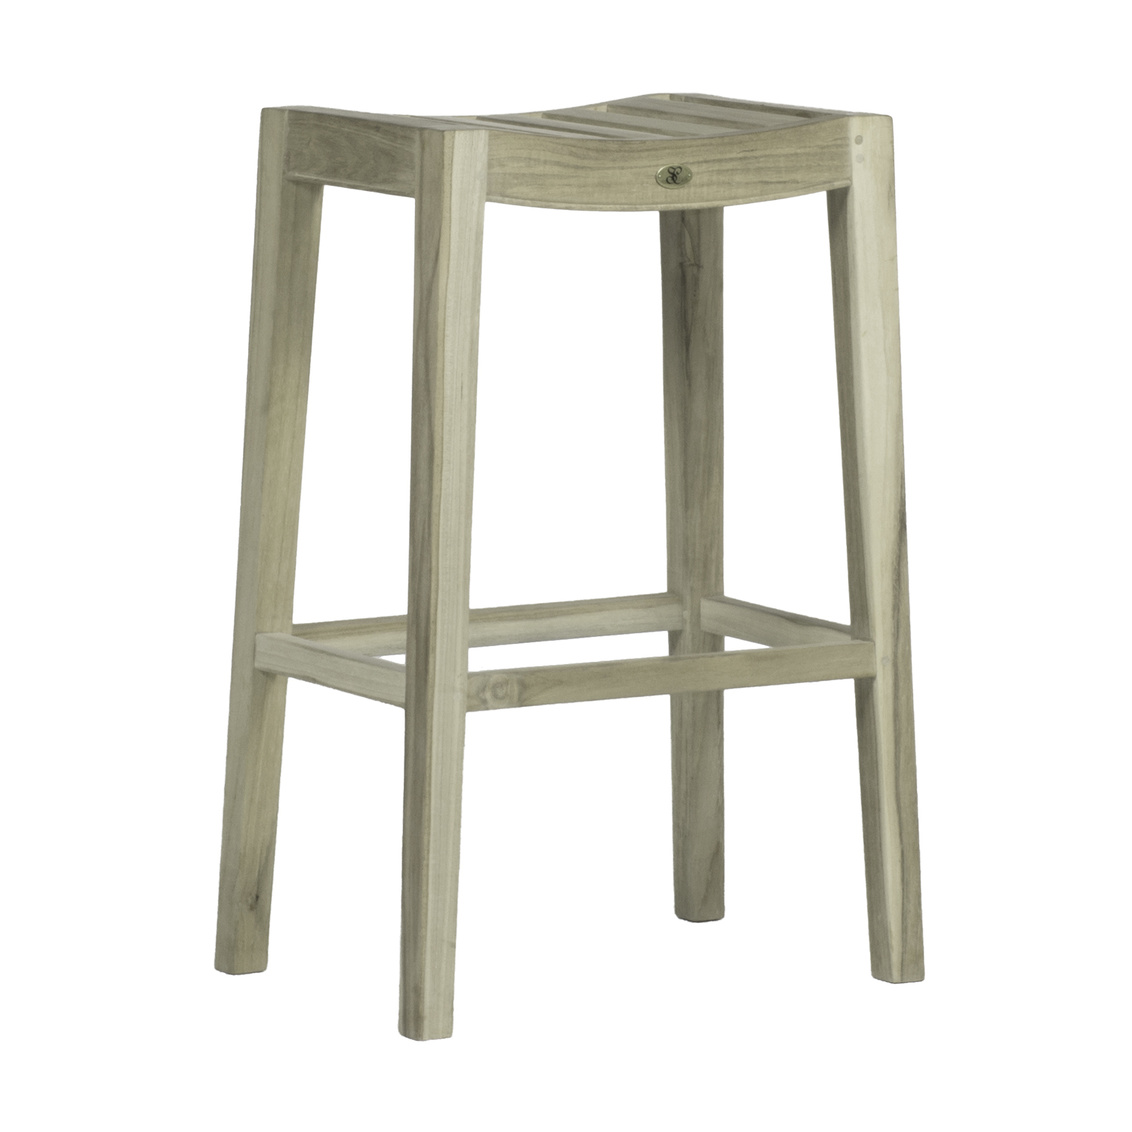 30 inch vivian bar stool in oyster teak – frame only product image